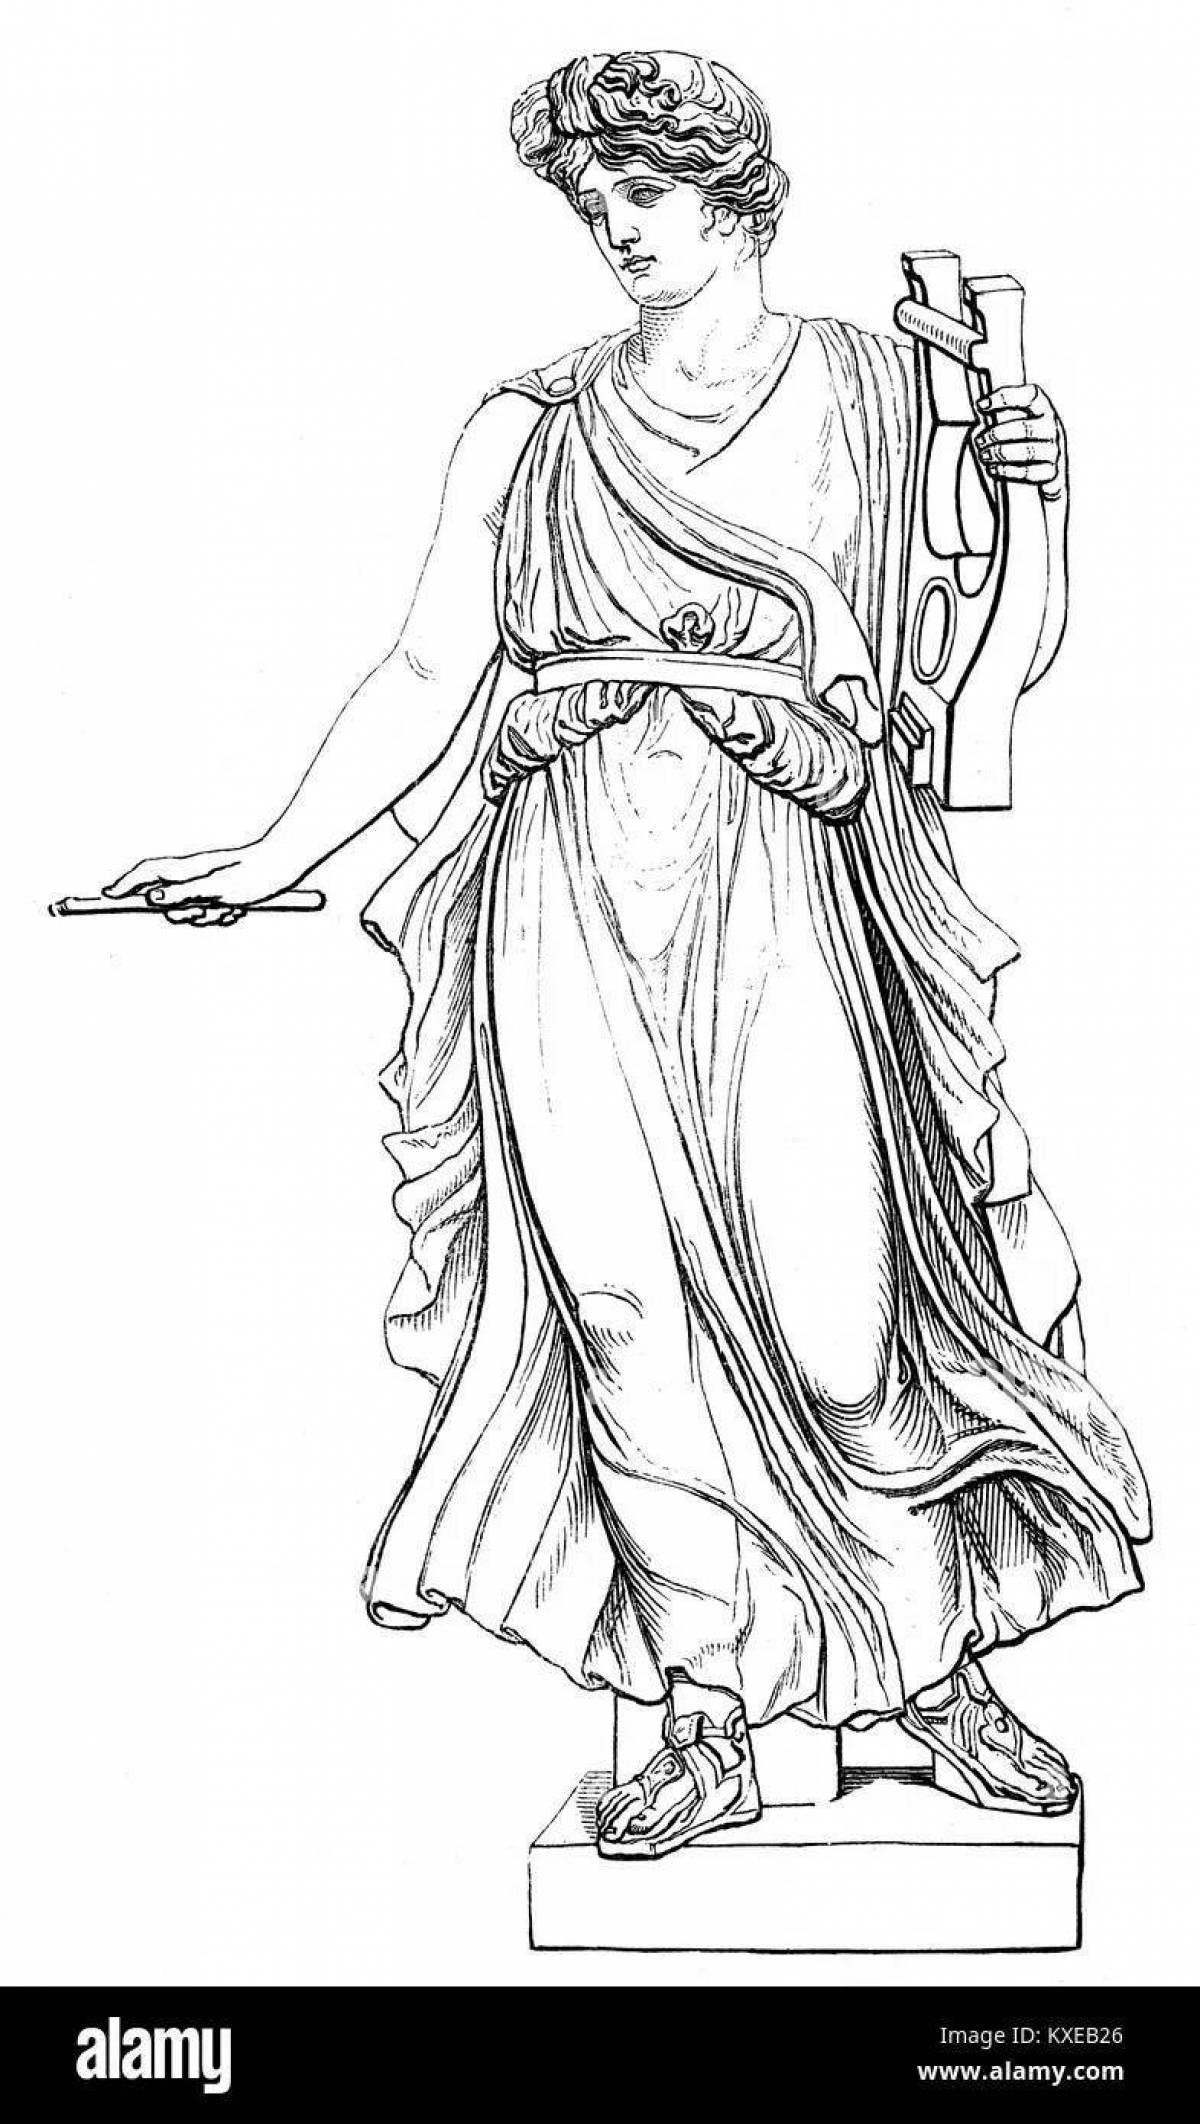 Awesome aphrodite coloring book